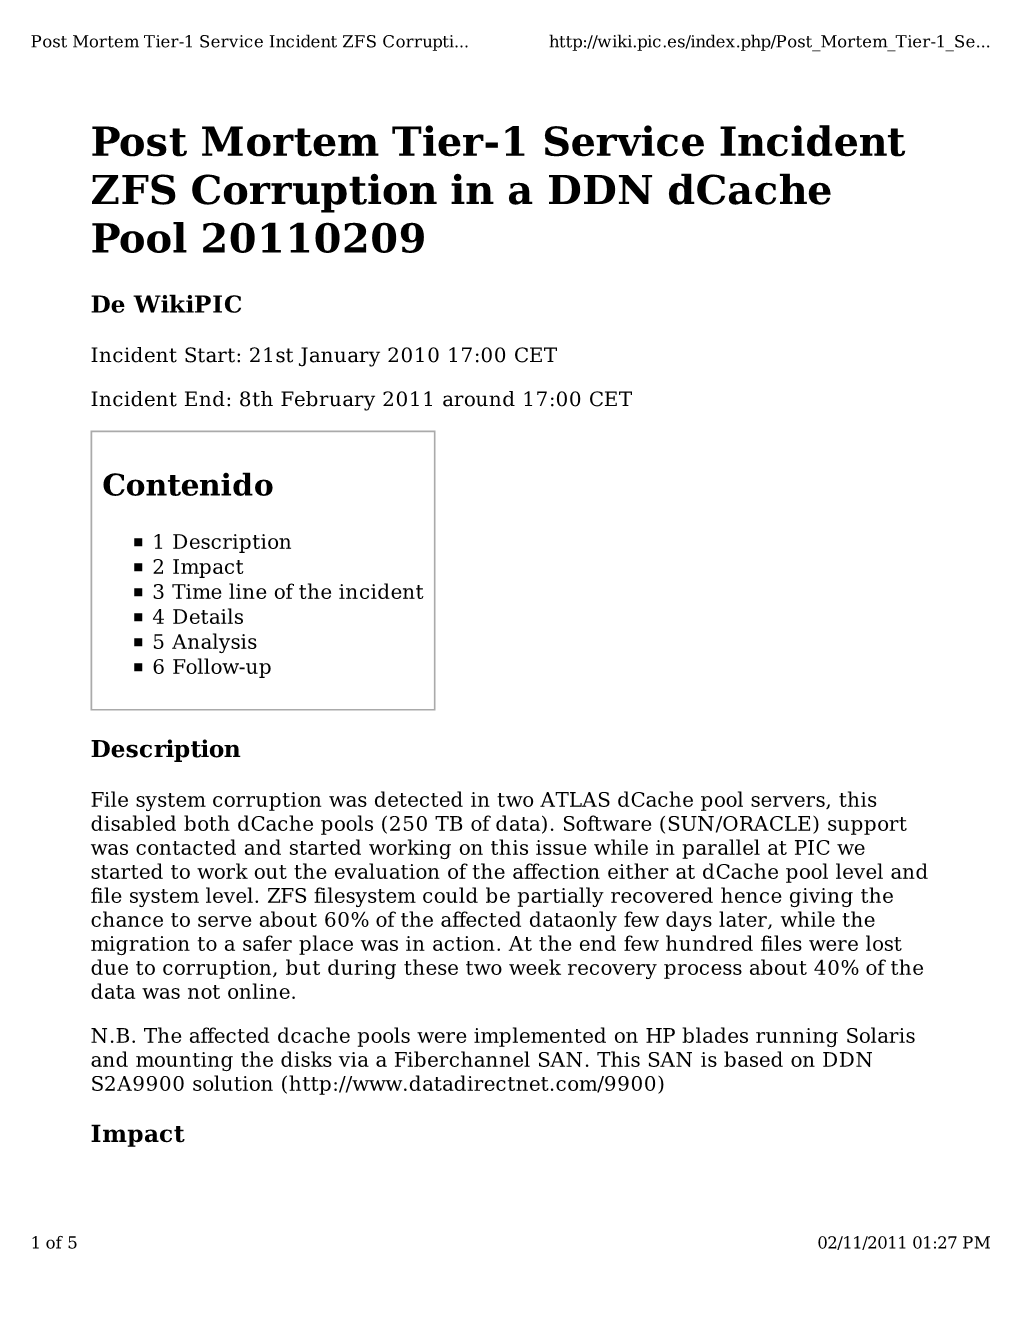 Post Mortem Tier-1 Service Incident ZFS Corruption in a DDN Dcache Pool 20110209